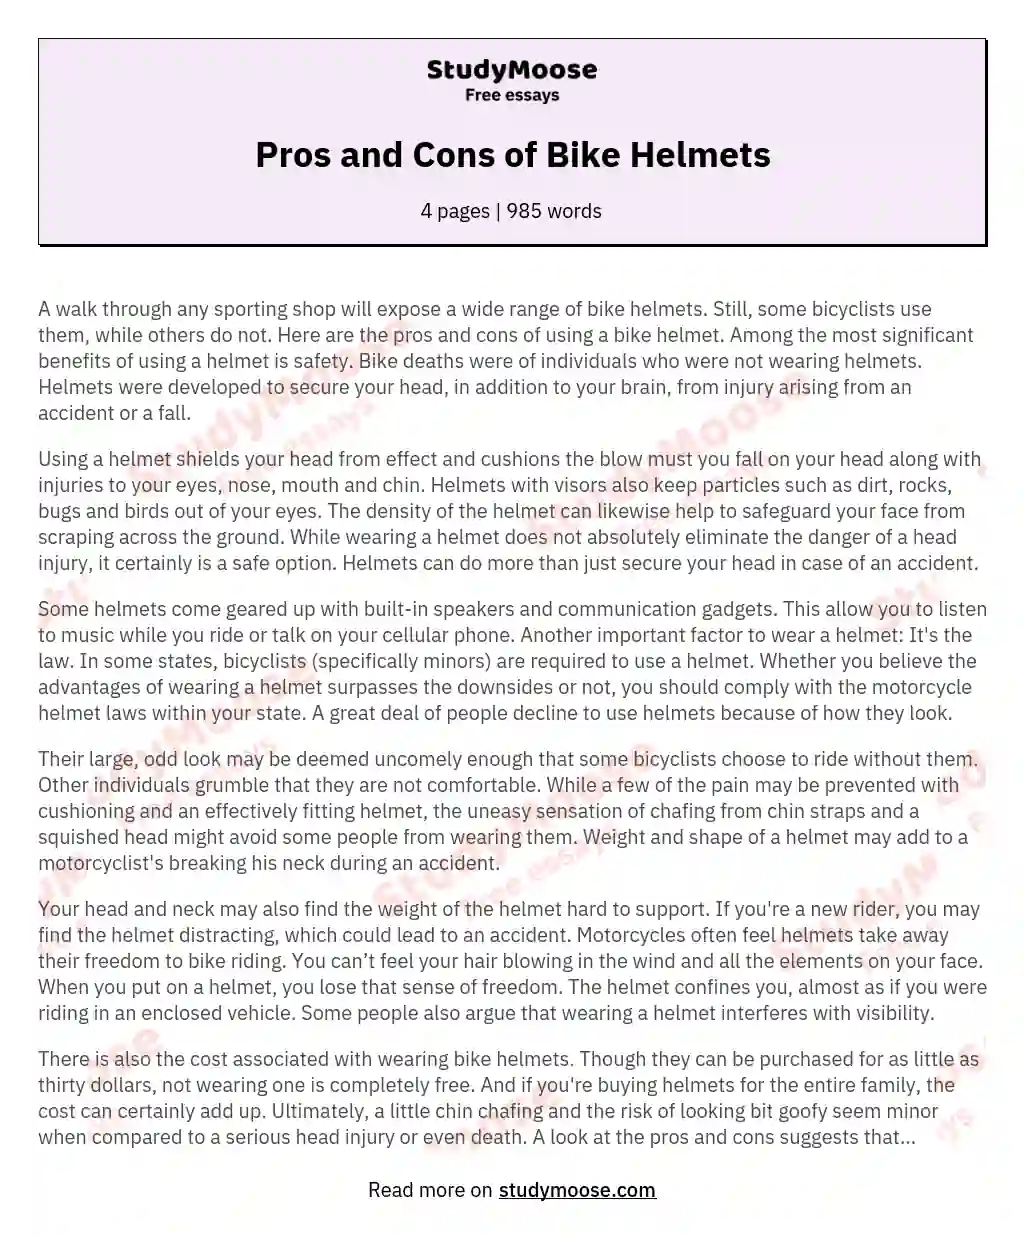 Pros and Cons of Bike Helmets